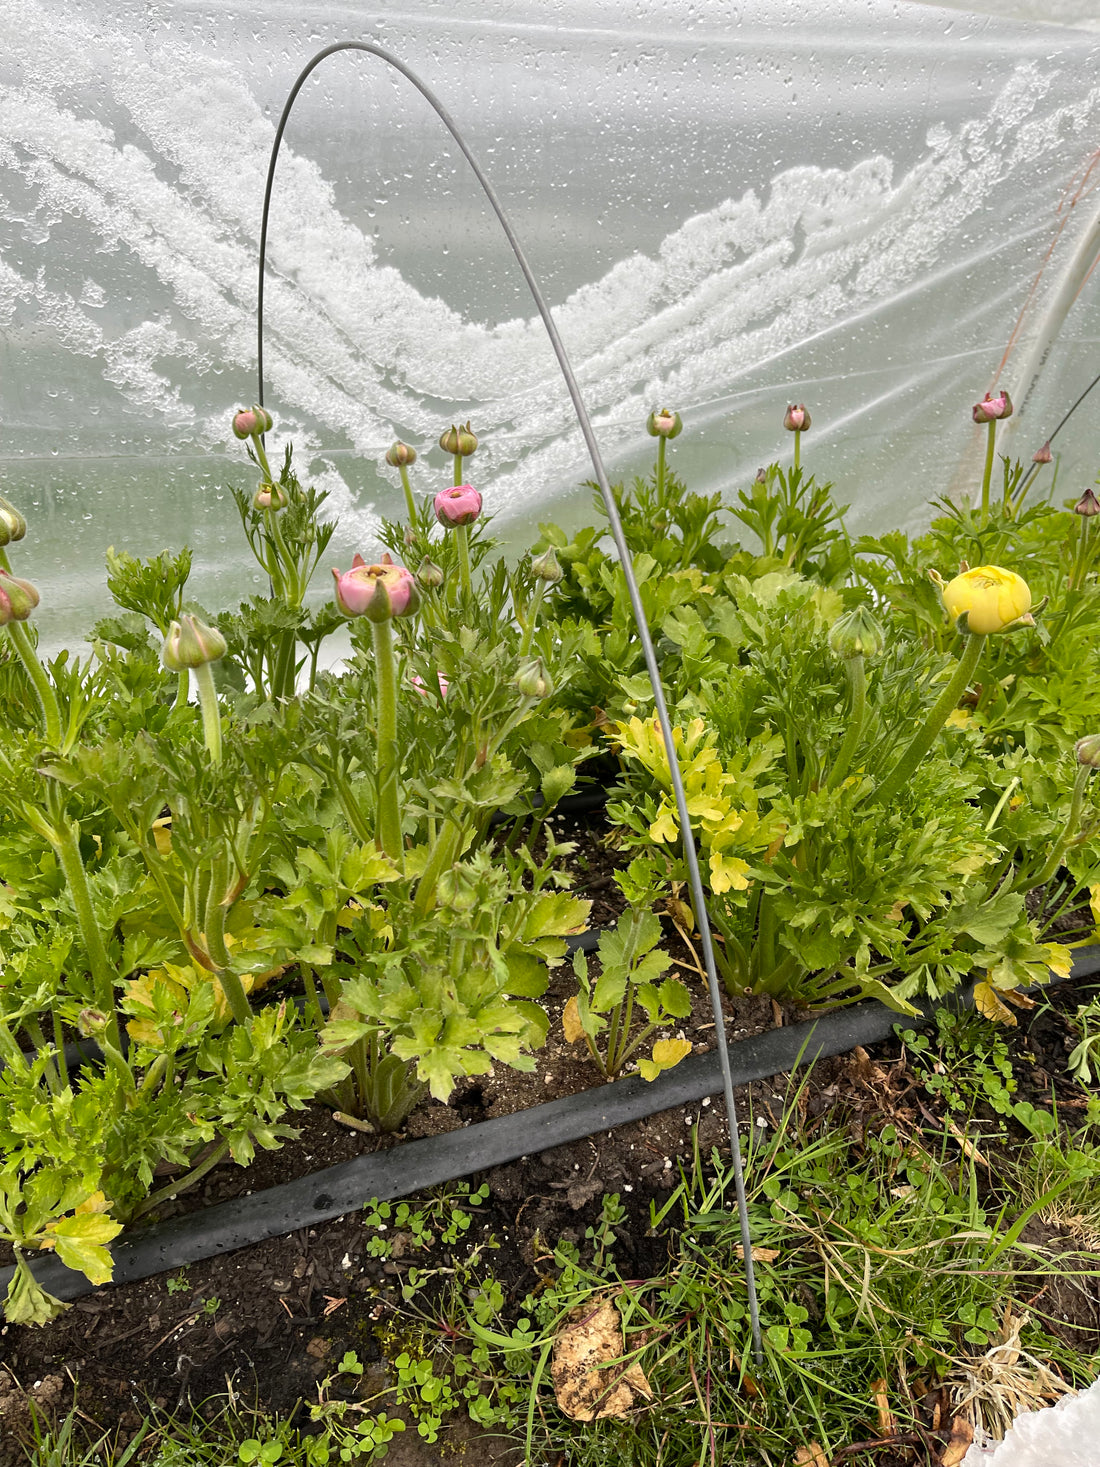 How to care for ranunculus during the winter